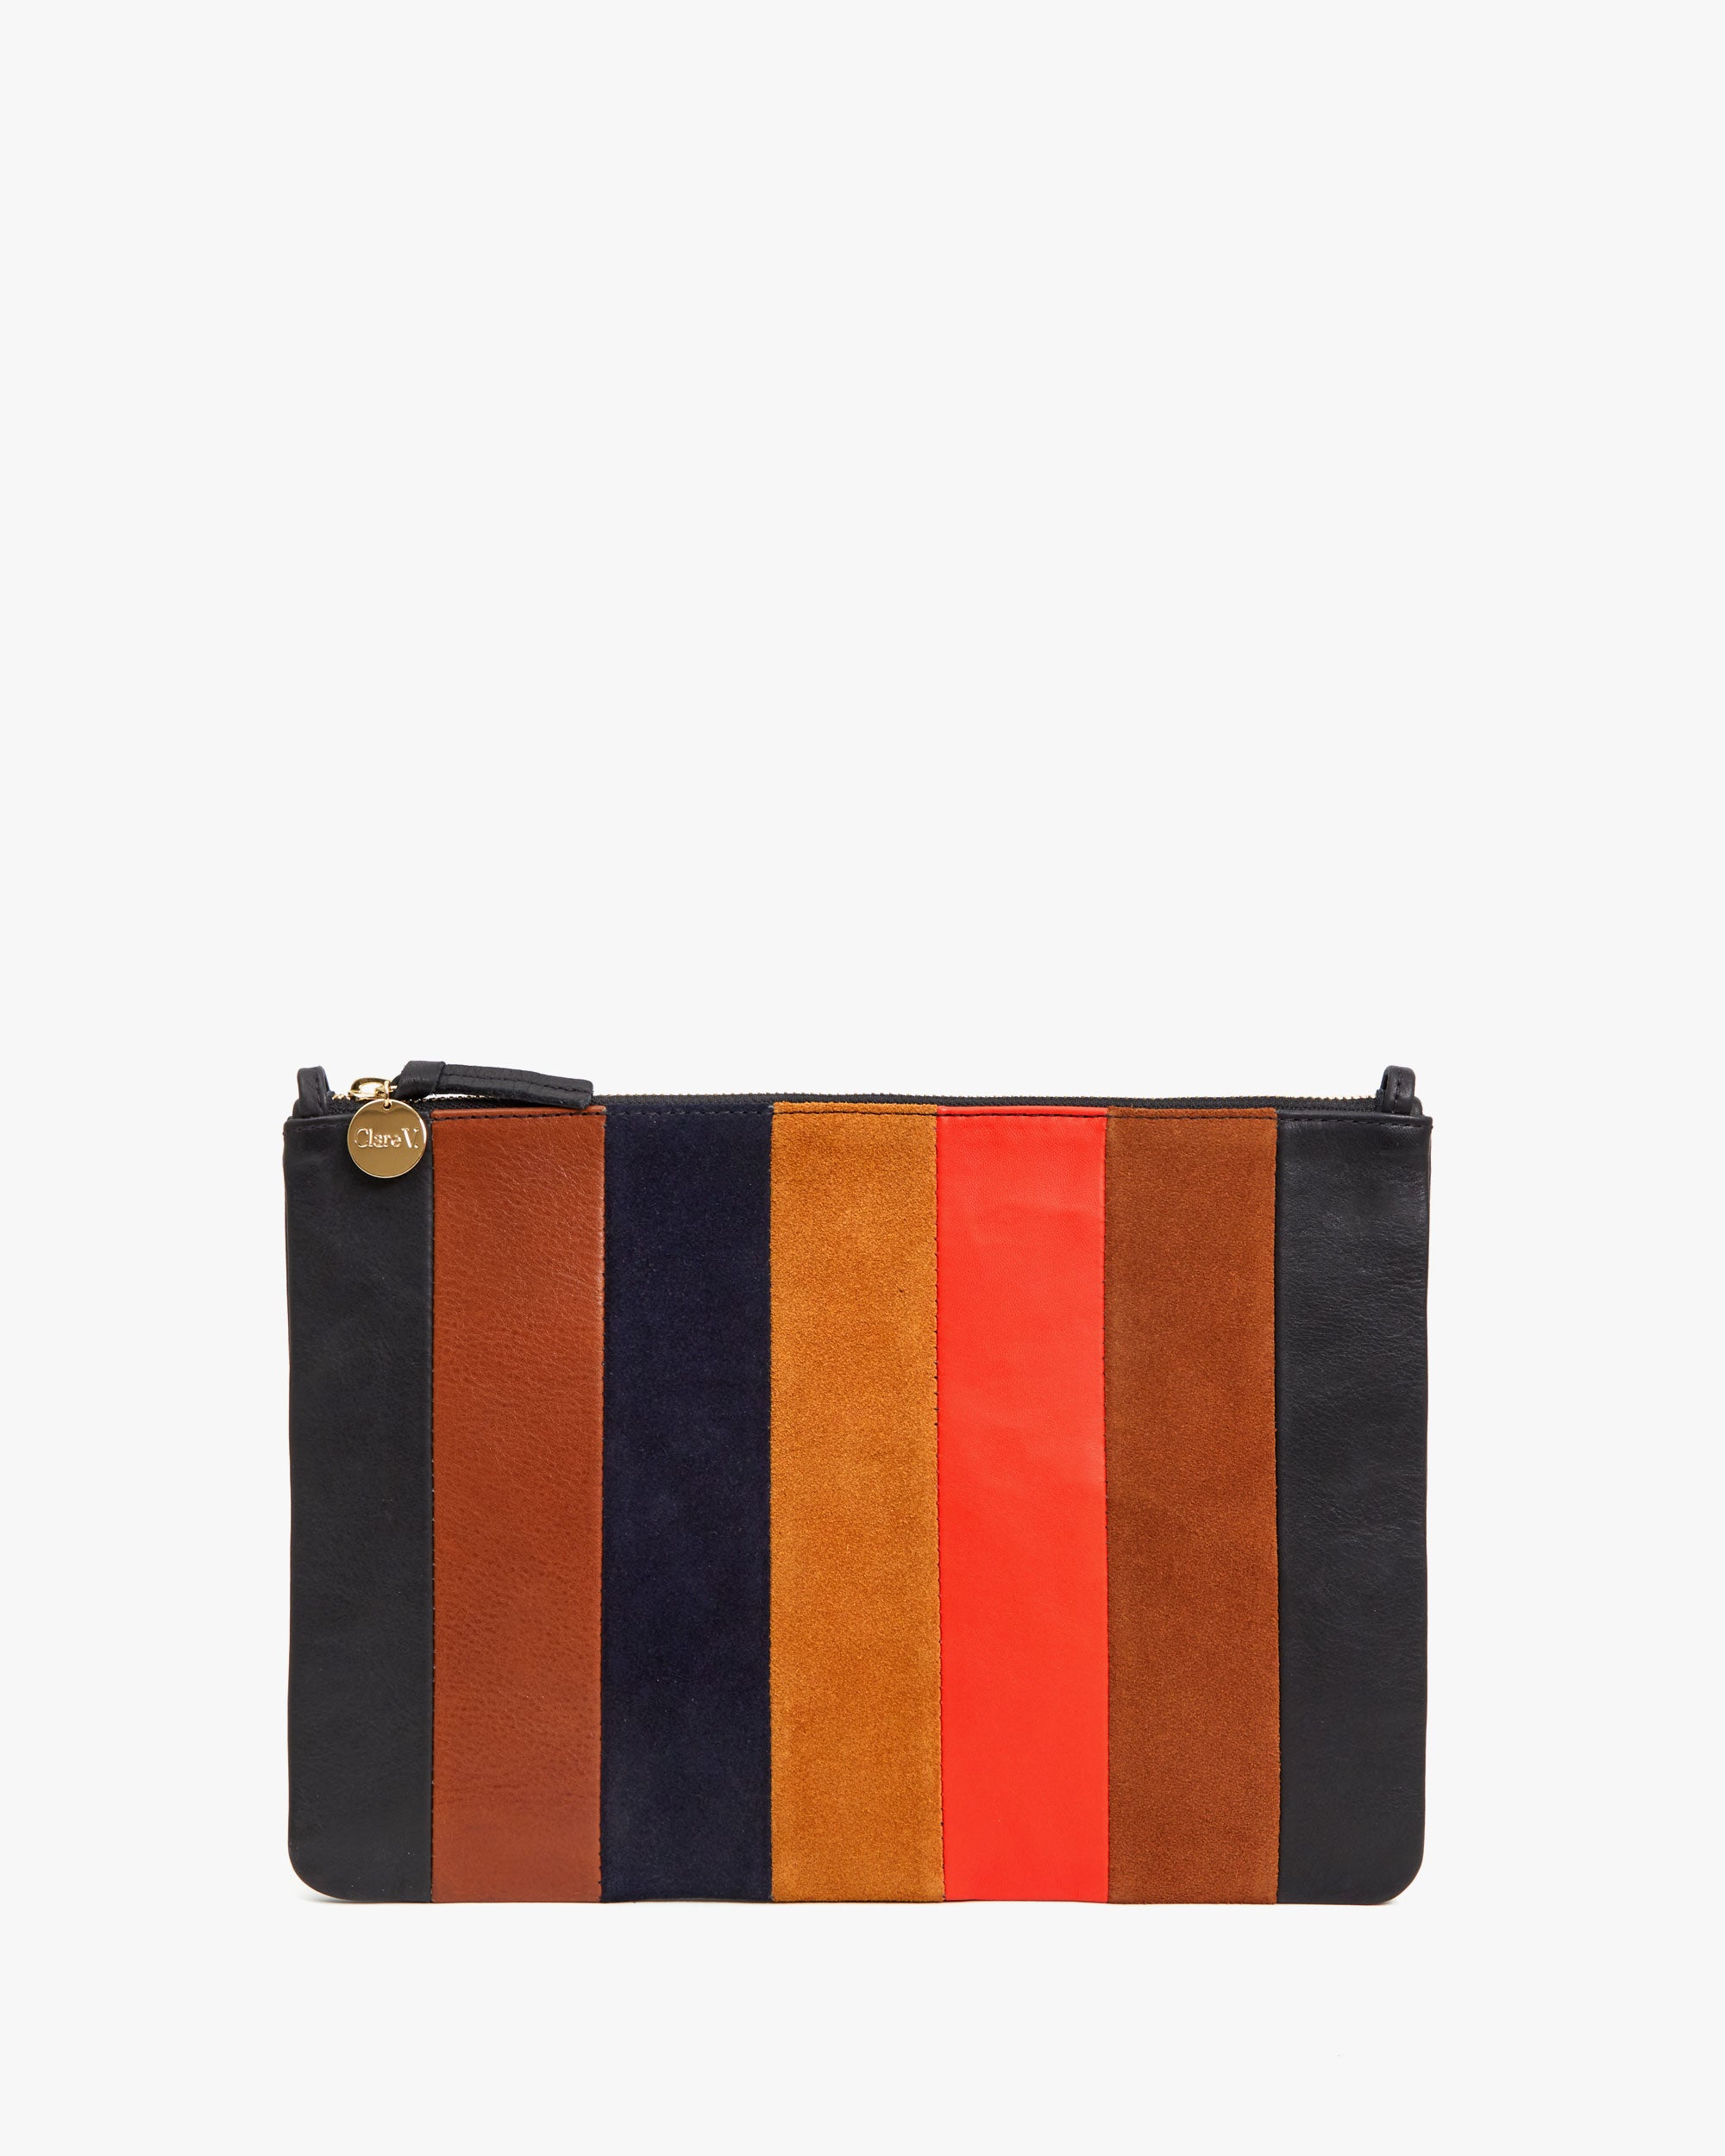 Women's Clare V. Clutches & Pouches